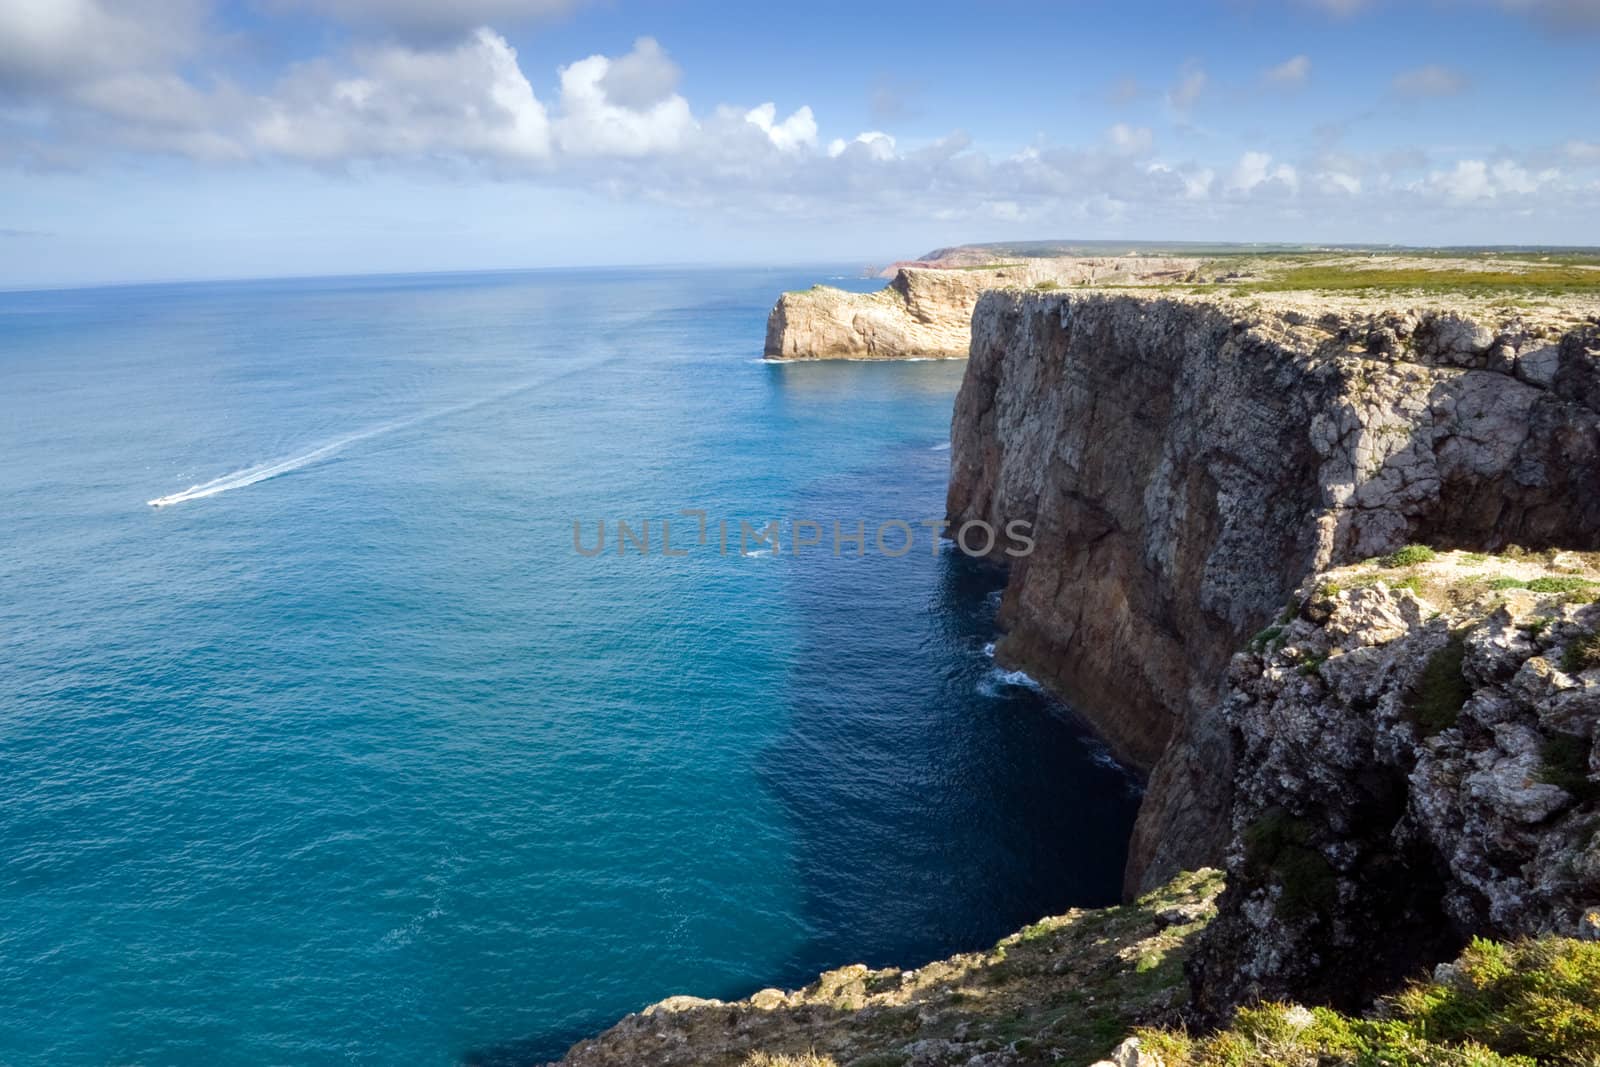 The cliffs at Cape Saint Vincent, near Sagres, Portugal, historically known as the 'end of the world'